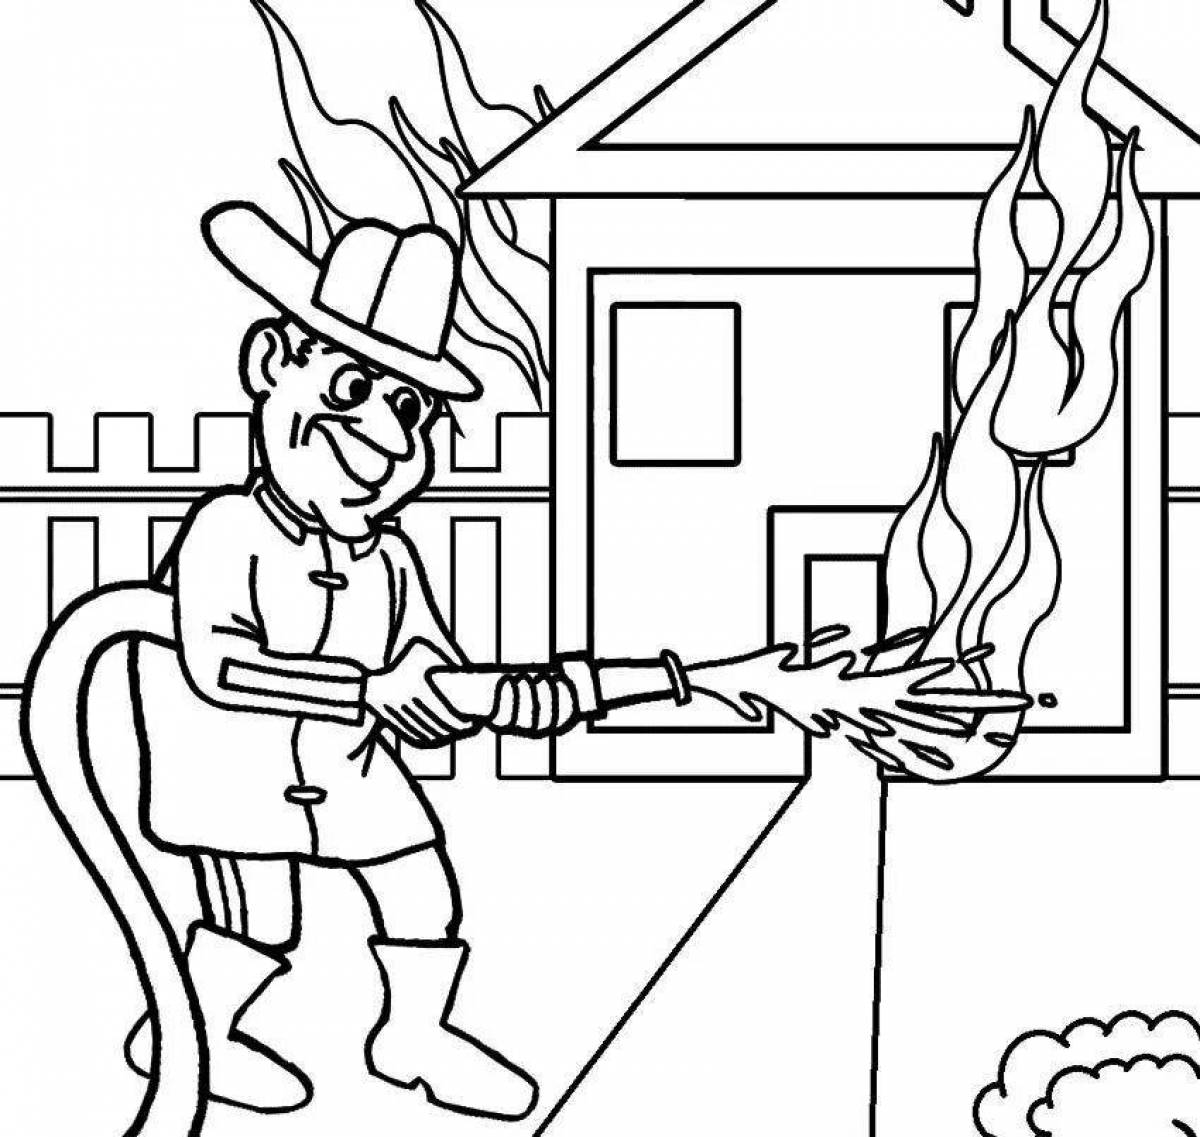 Awesome fire safety coloring page